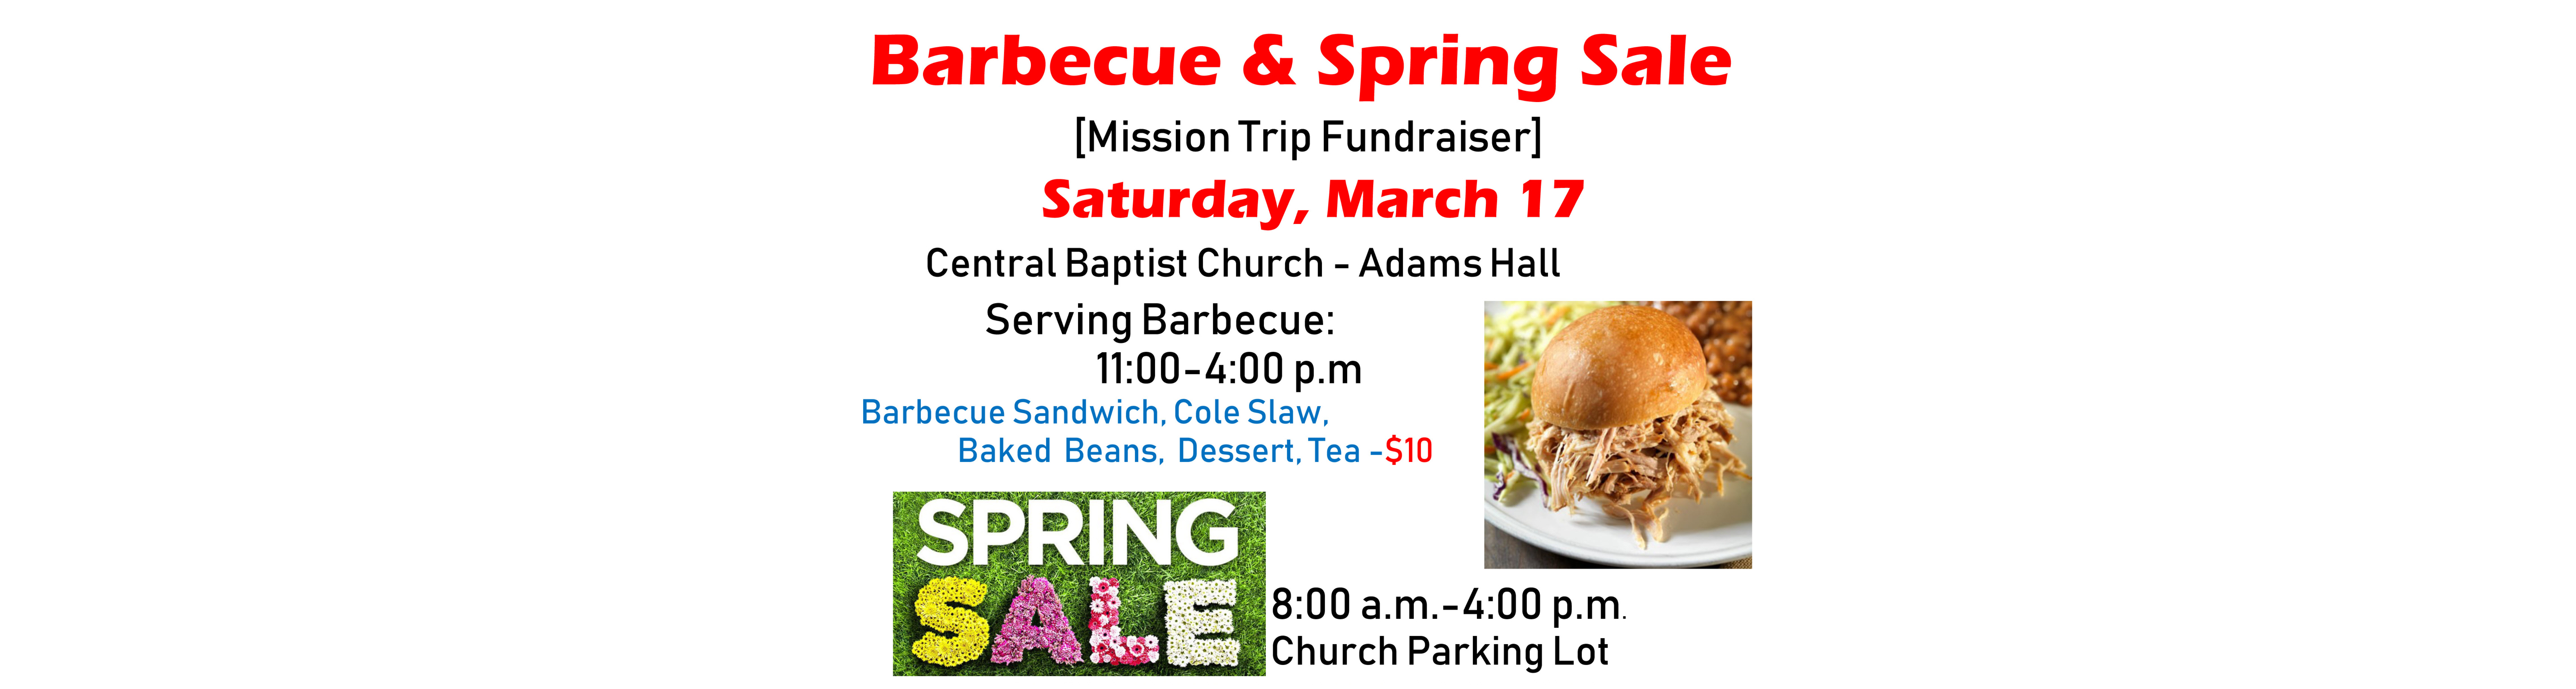 Barbecue and Spring Sale to Benefit Missions